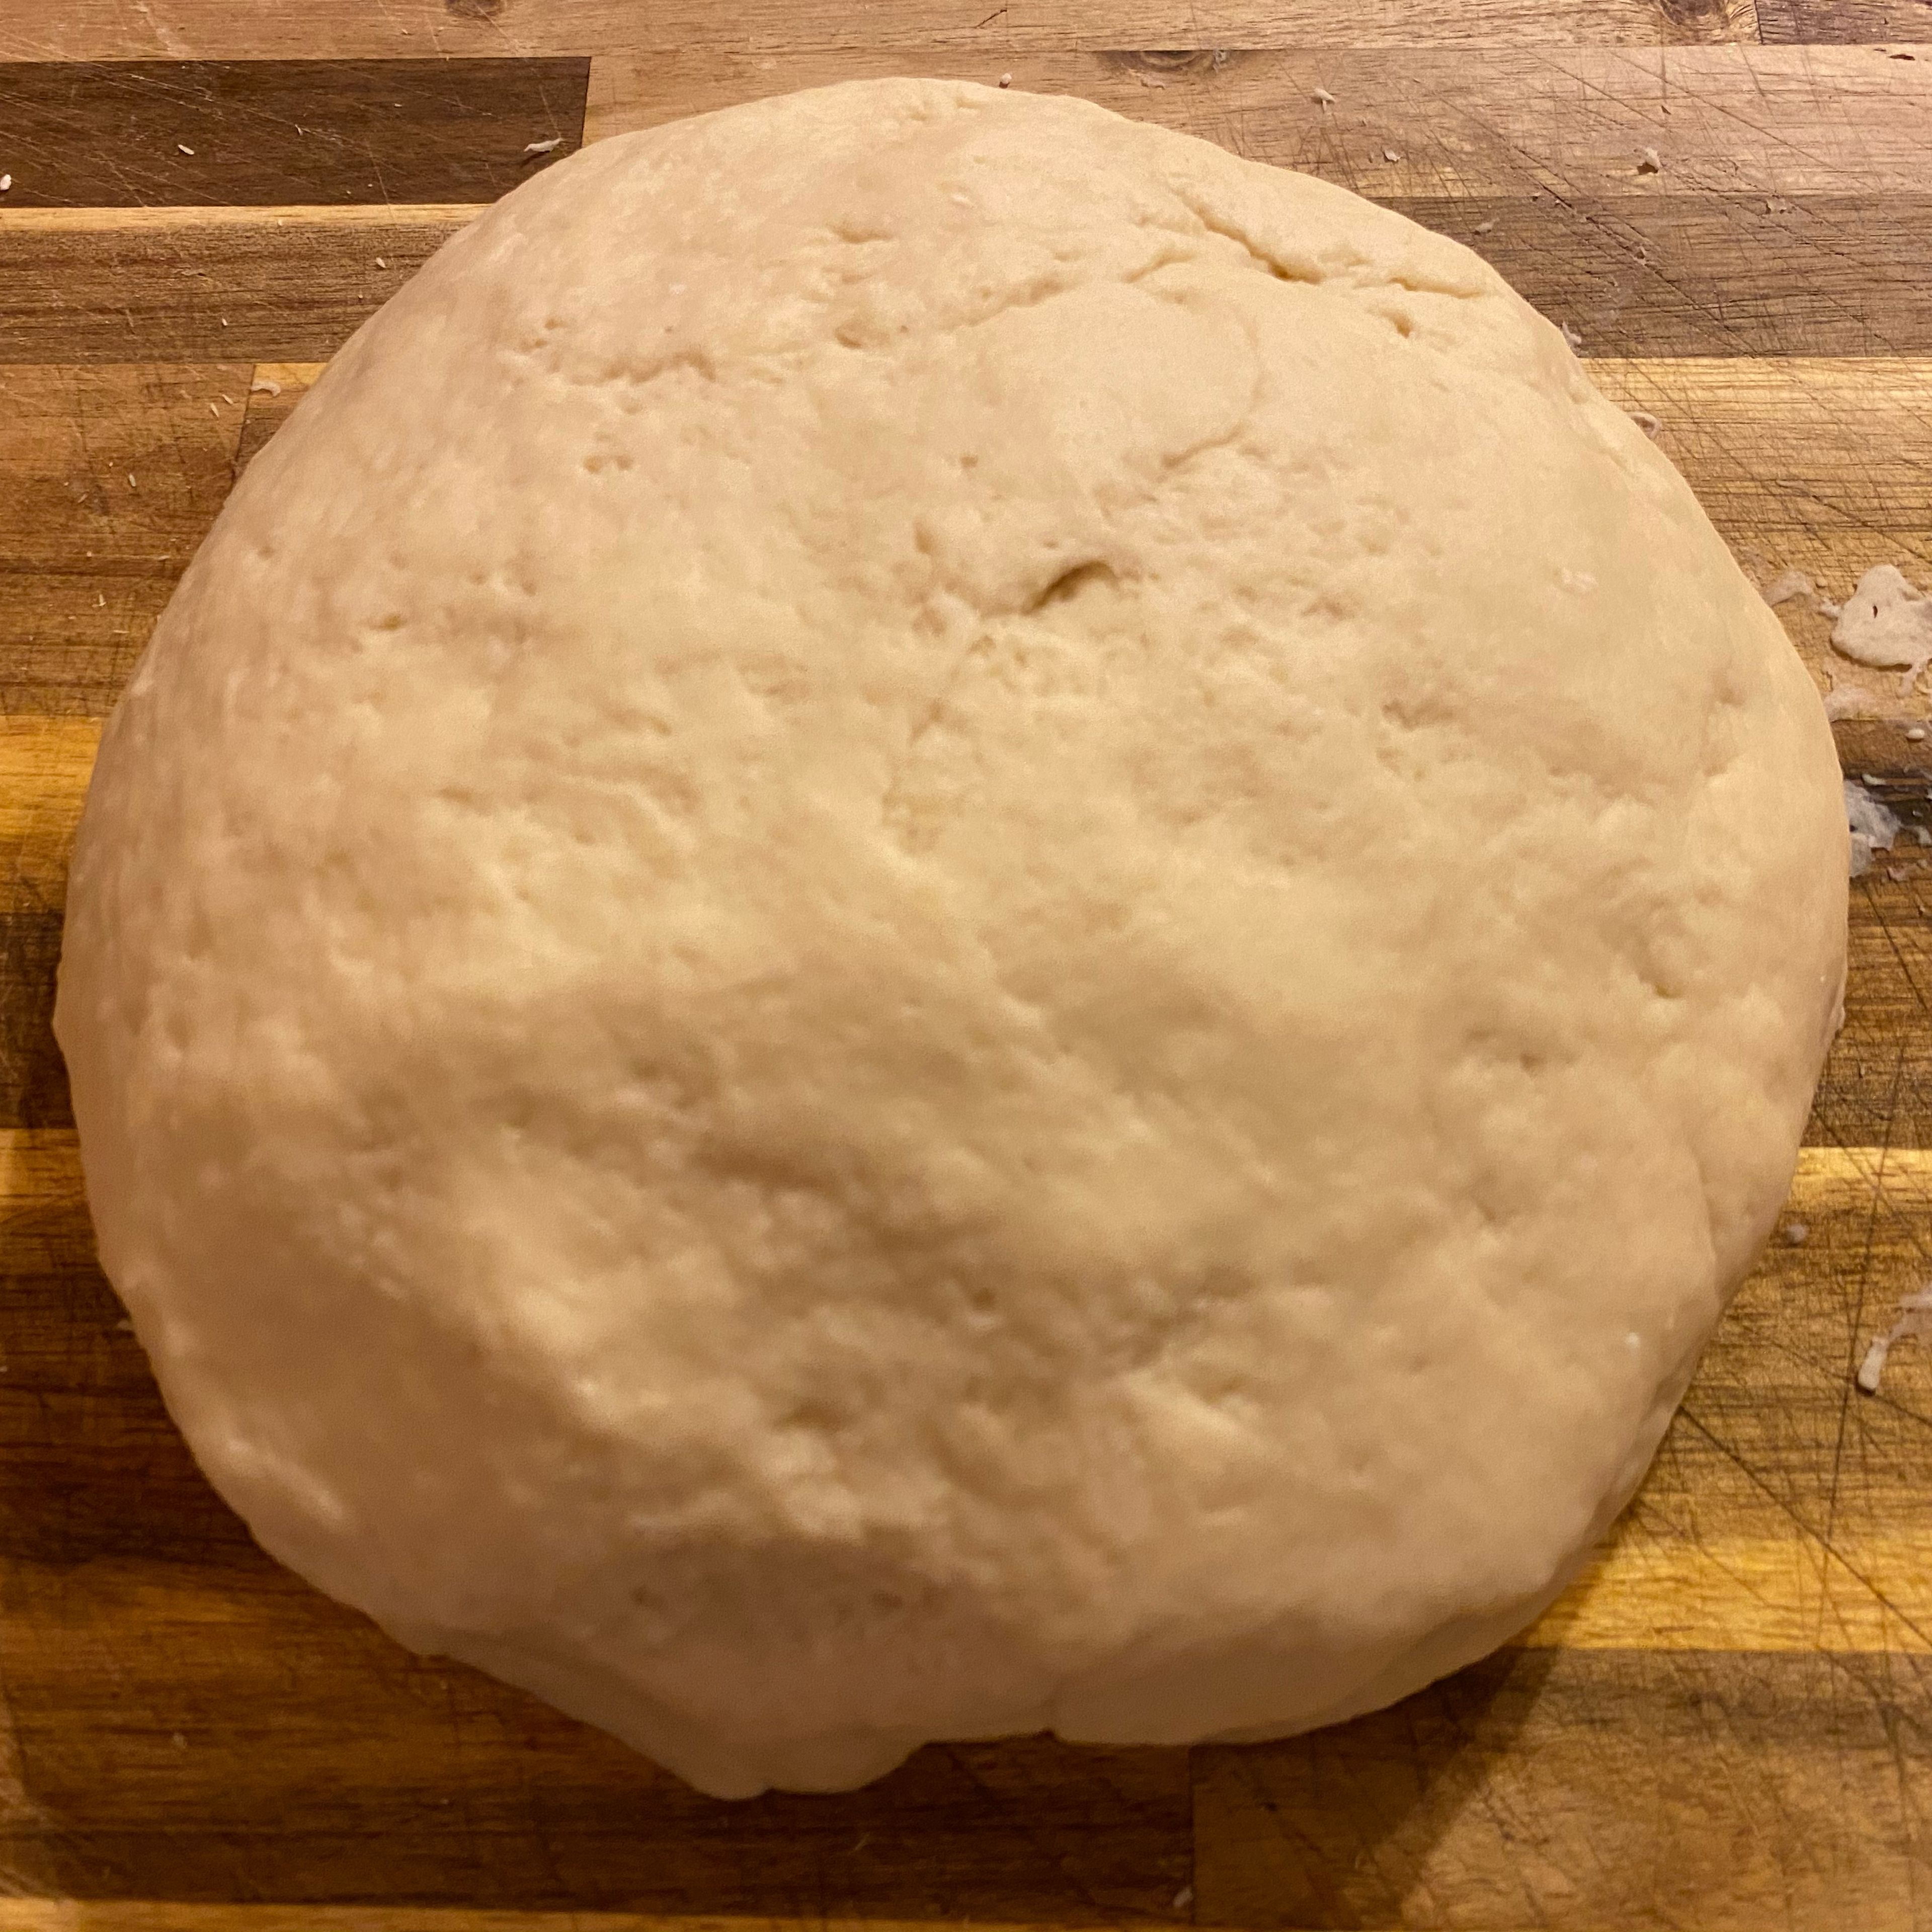 Pour a little of the hot liquid in the well and mix. Pour the remaining liquid over the dough and mix well. Wrap the dough in plastic wrap and chill in the fridge for at least 2 hours.